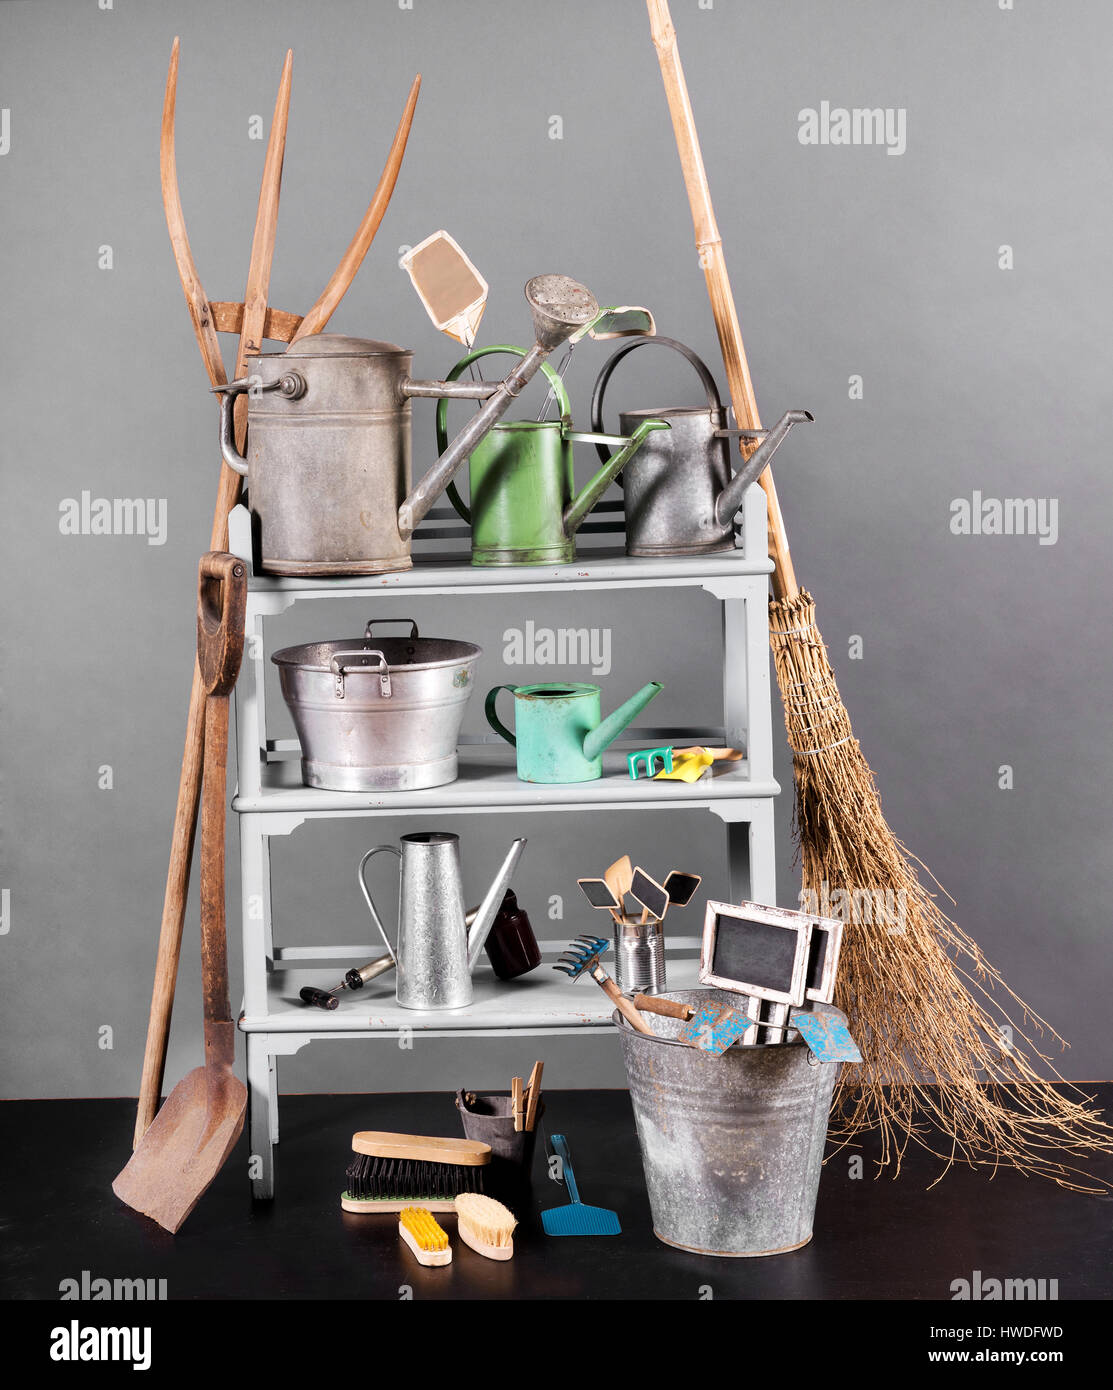 Assortment of vintage gardening tools arranged on shelves with watering cans, bucket, straw broom, spade and fork with plant labels and accessories Stock Photo